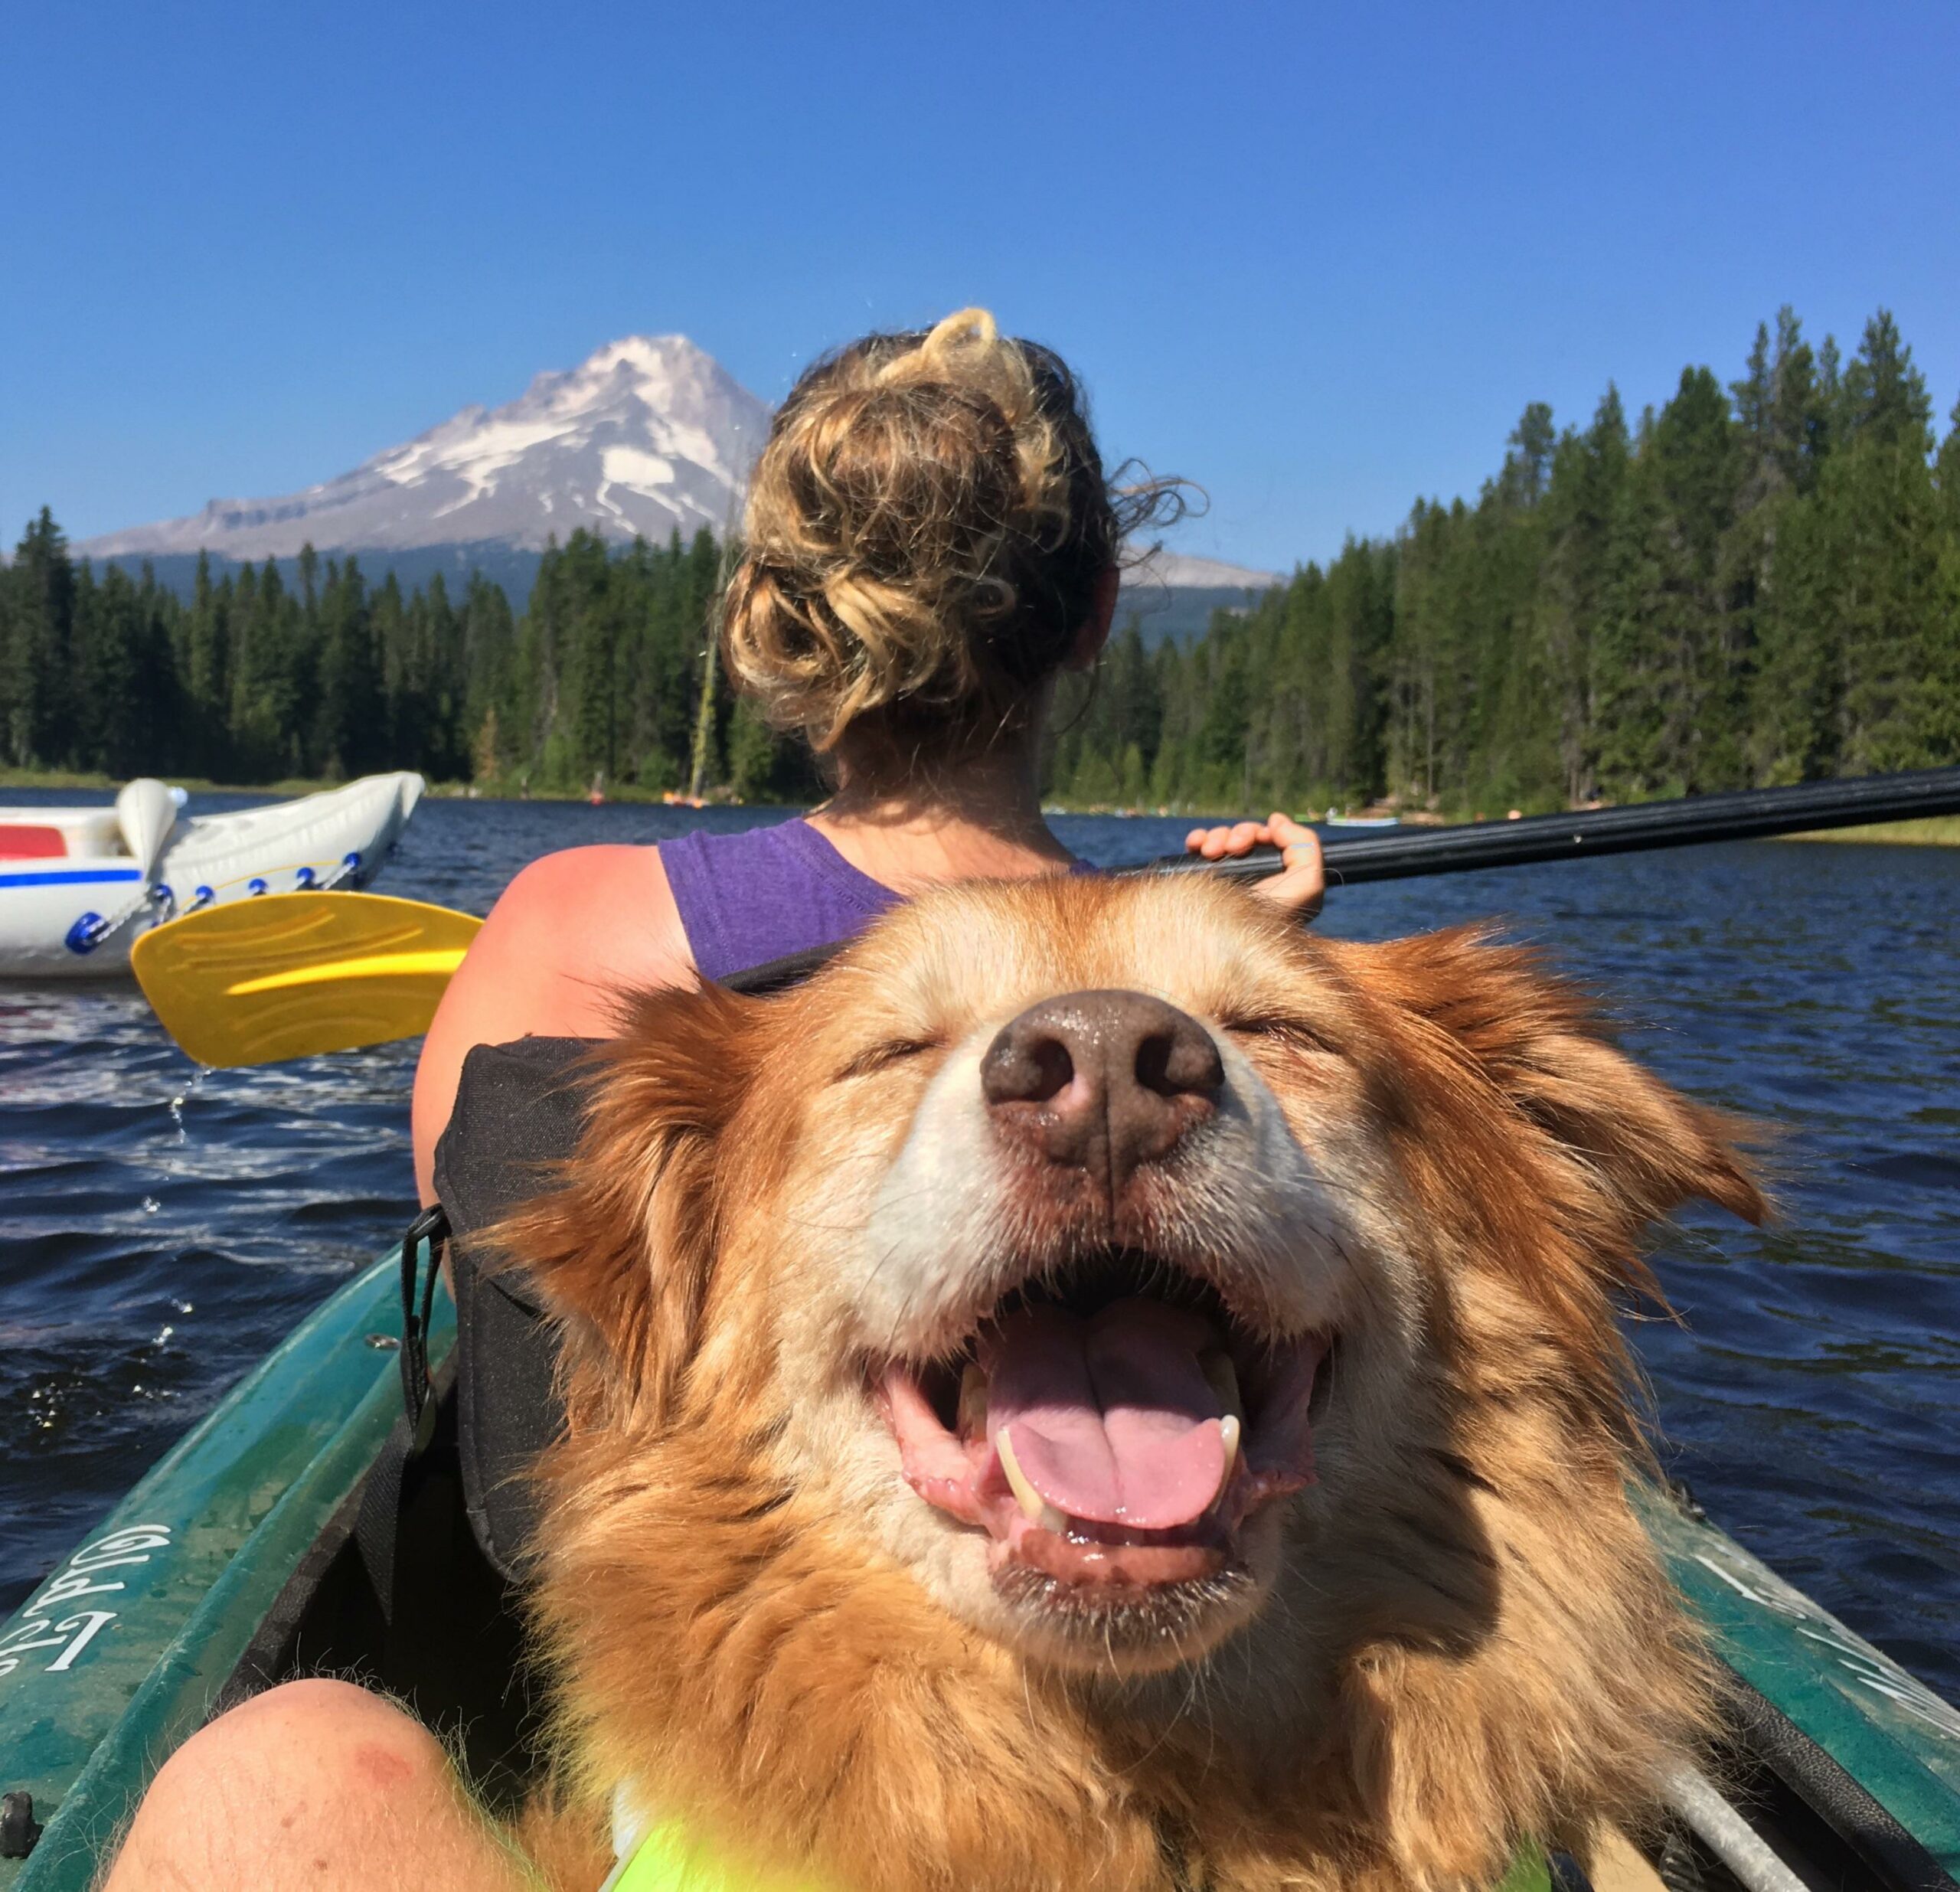 A smiling dog sits with her eyes closed and mouth open on a canoe with trees and a large mountain in the distance.